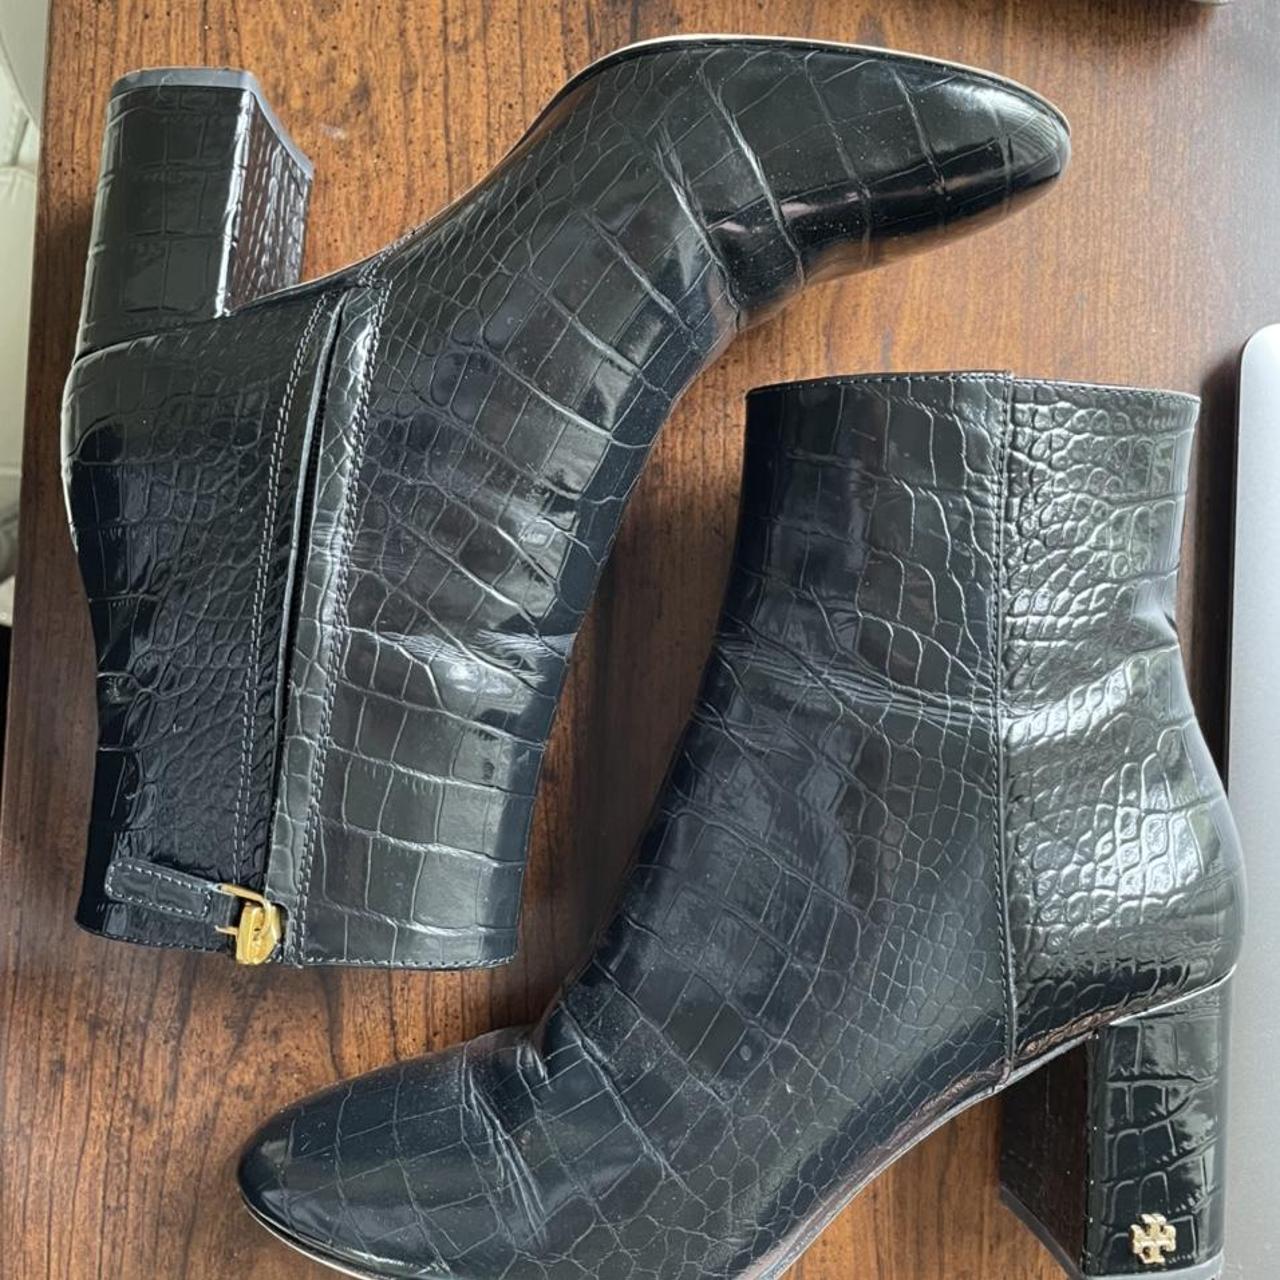 Tory Burch Women's Black and Gold Boots | Depop